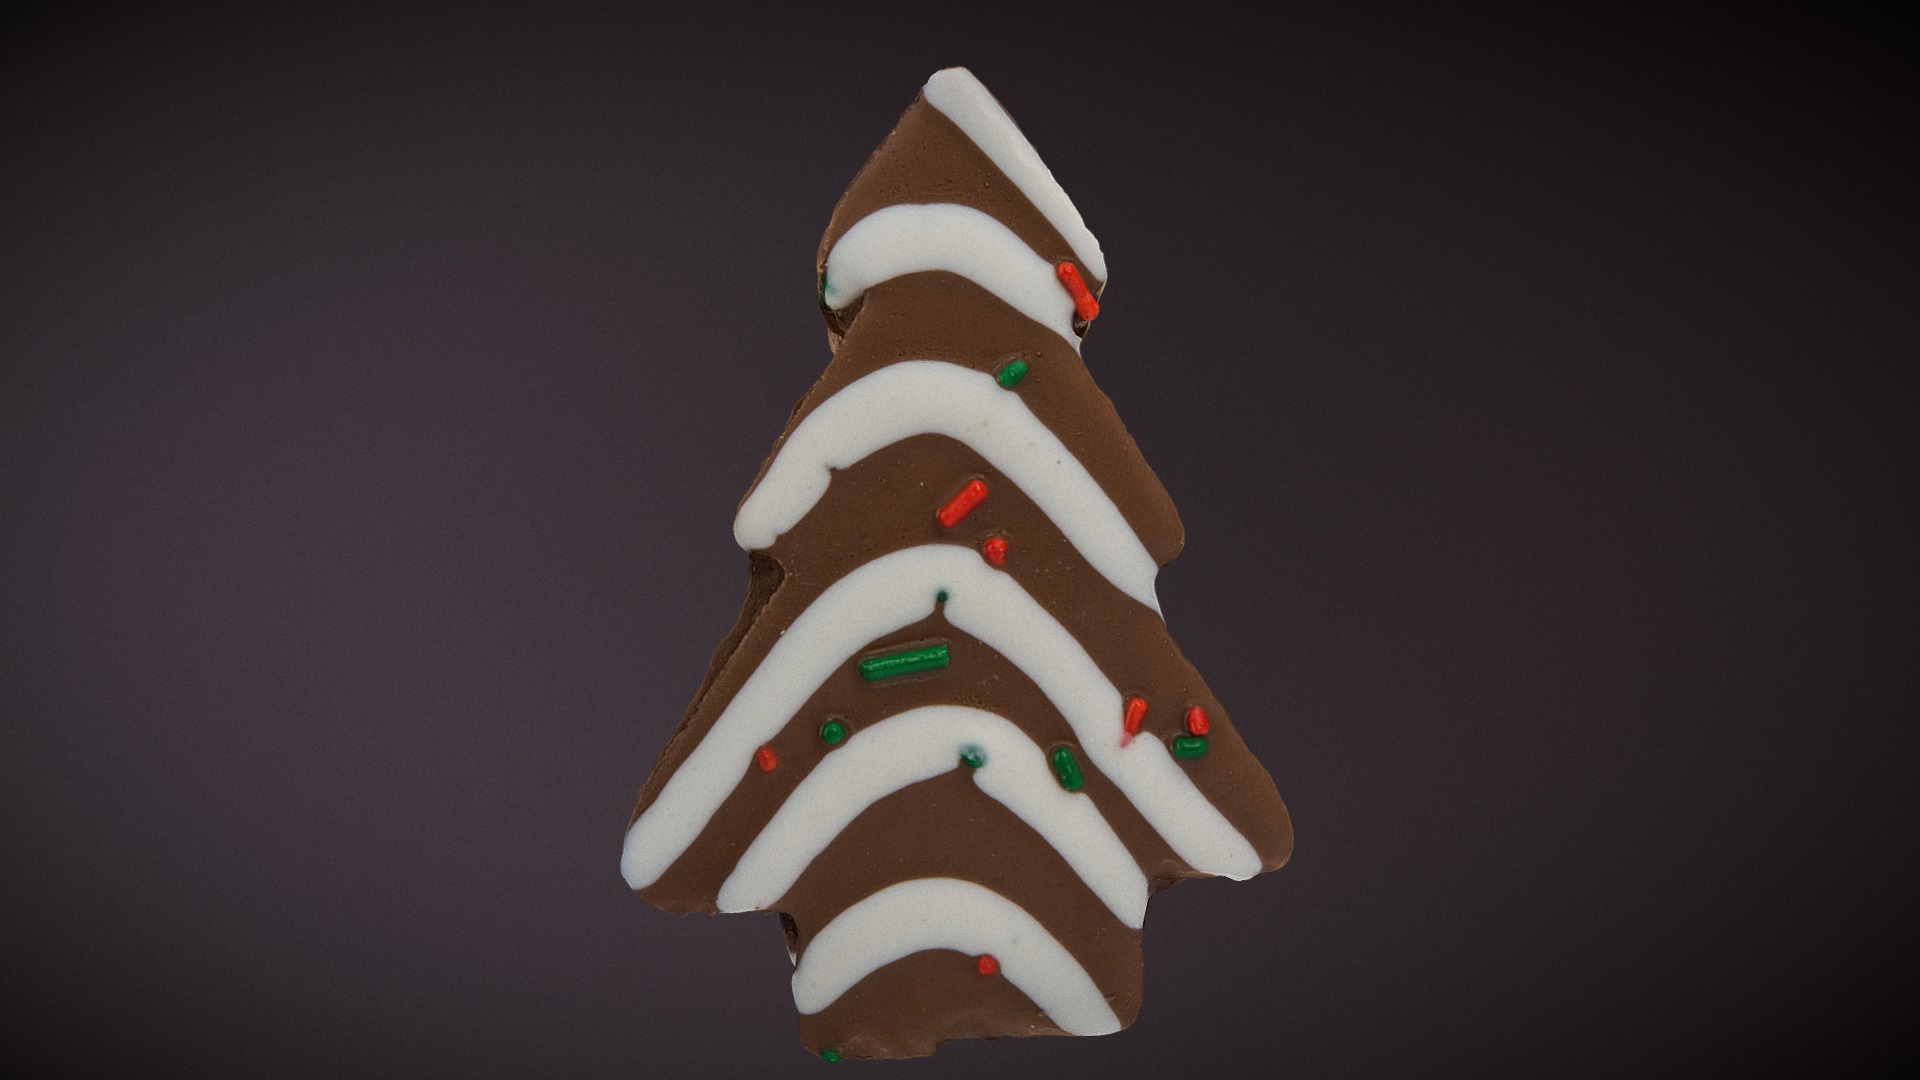 3D model Little Debbie Christmas Tree Cake - This is a 3D model of the Little Debbie Christmas Tree Cake. The 3D model is about a white and brown ice cream cone.